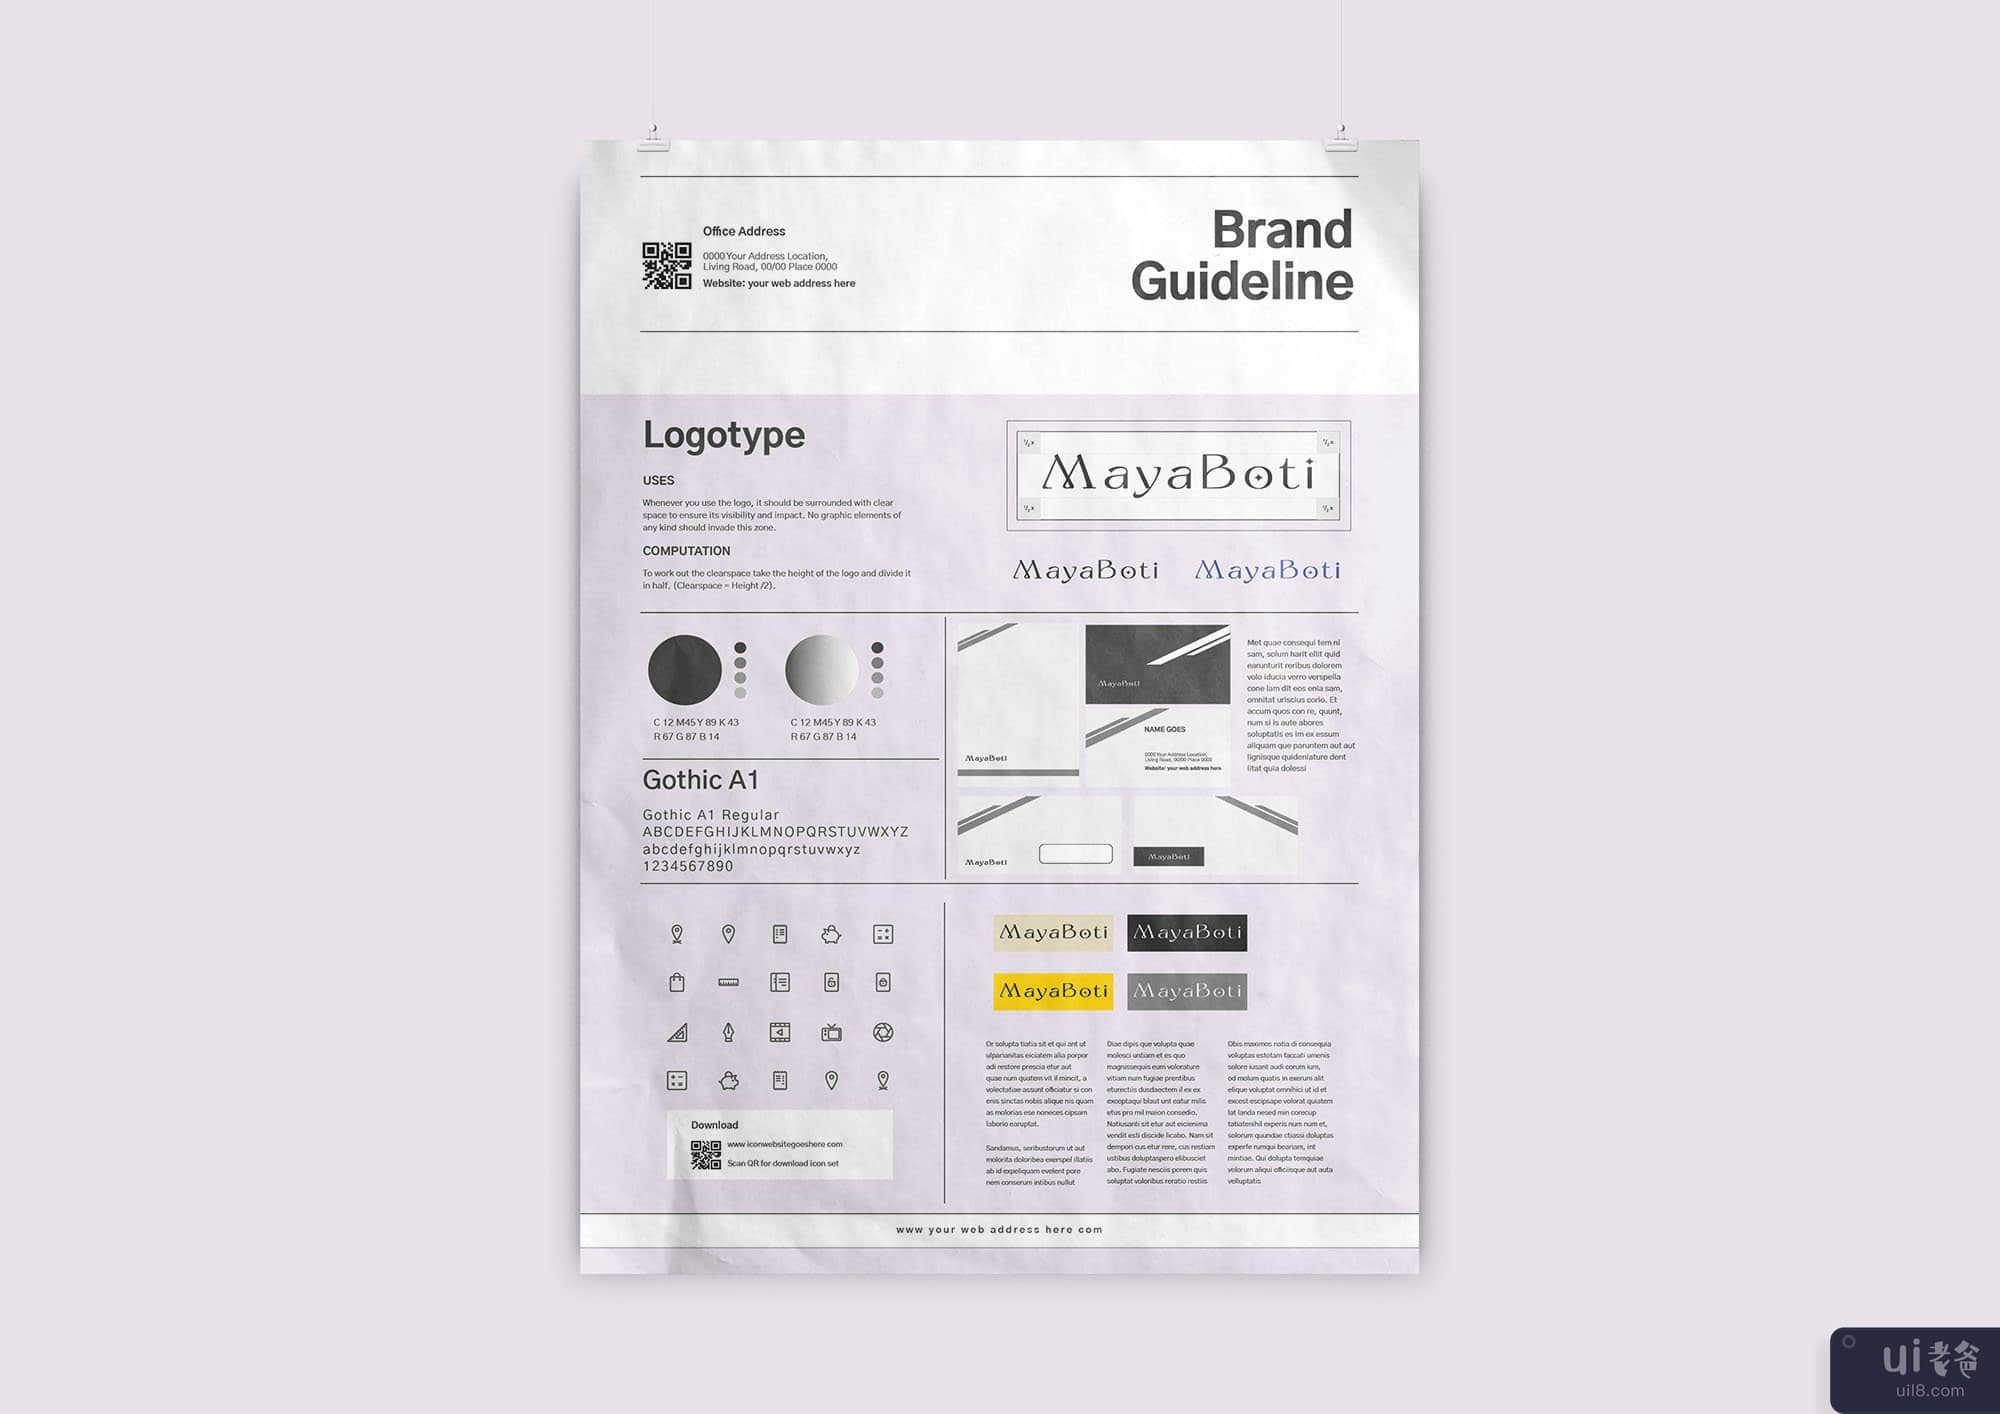 A3 品牌指南海报 Din A3 品牌指南海报(A3 Brand Guideline poster Din A3 Brand Guideline poster)插图5